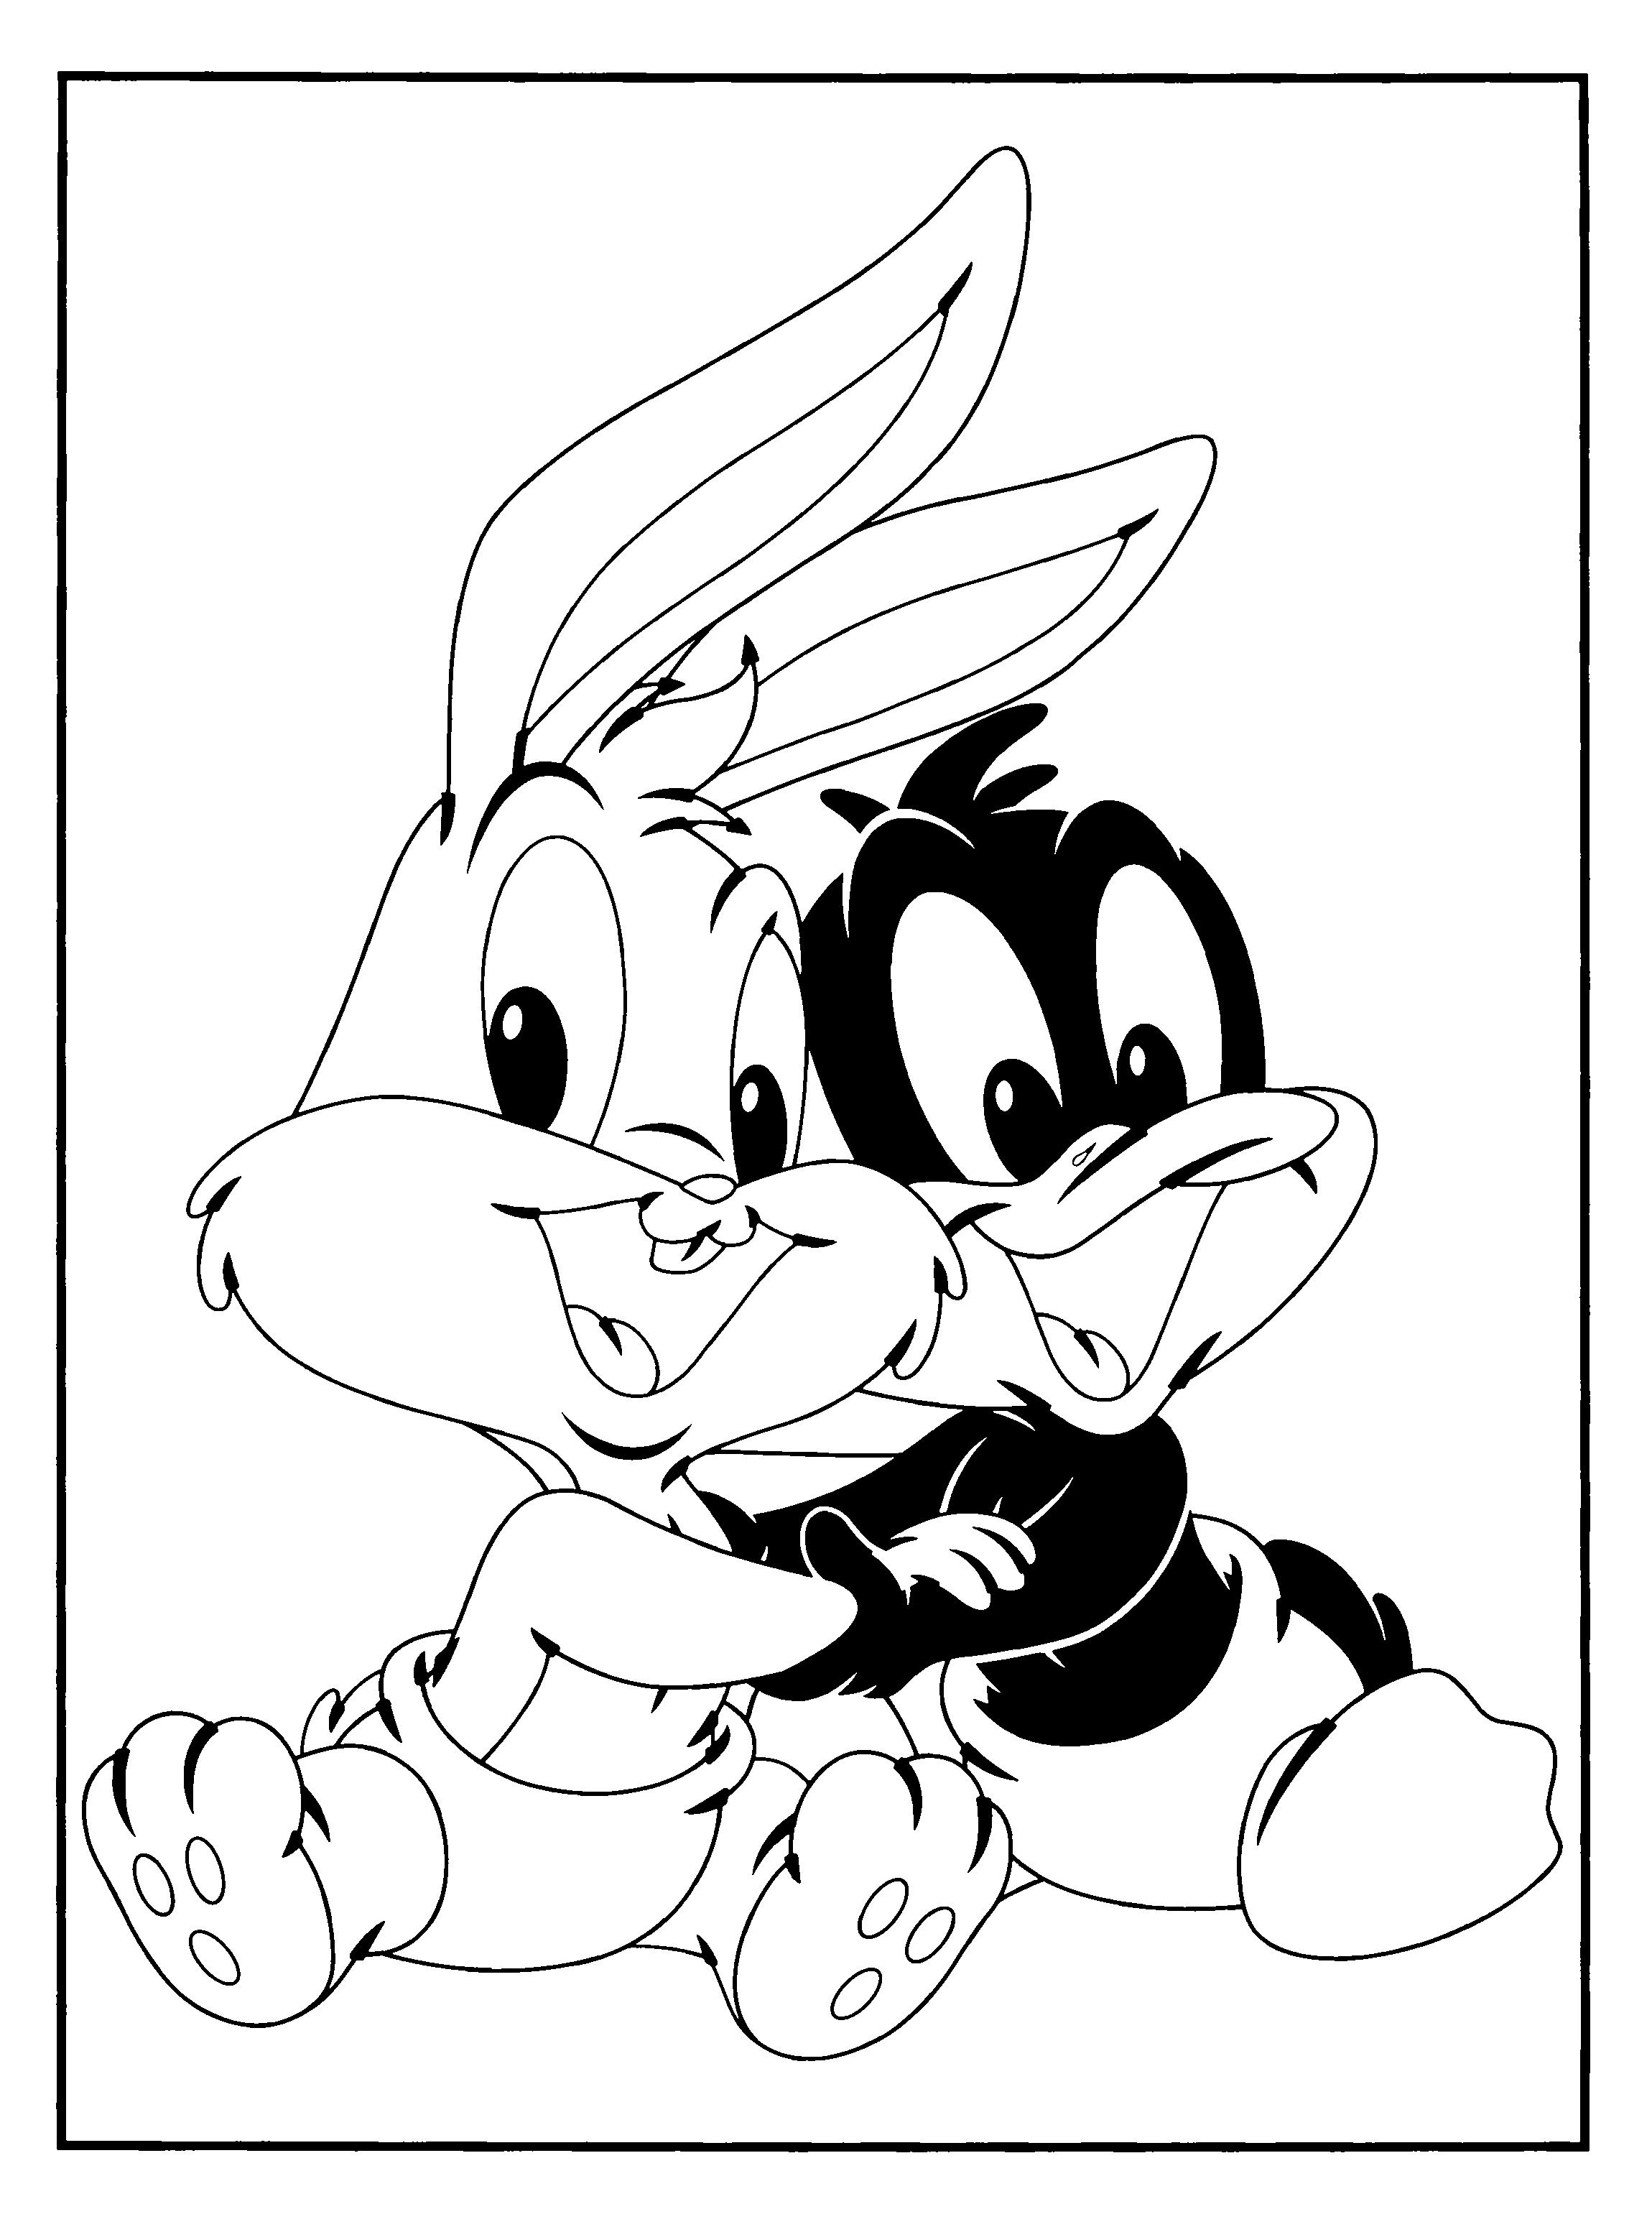 looney tunes coloring pages | www.pavingmaze.com